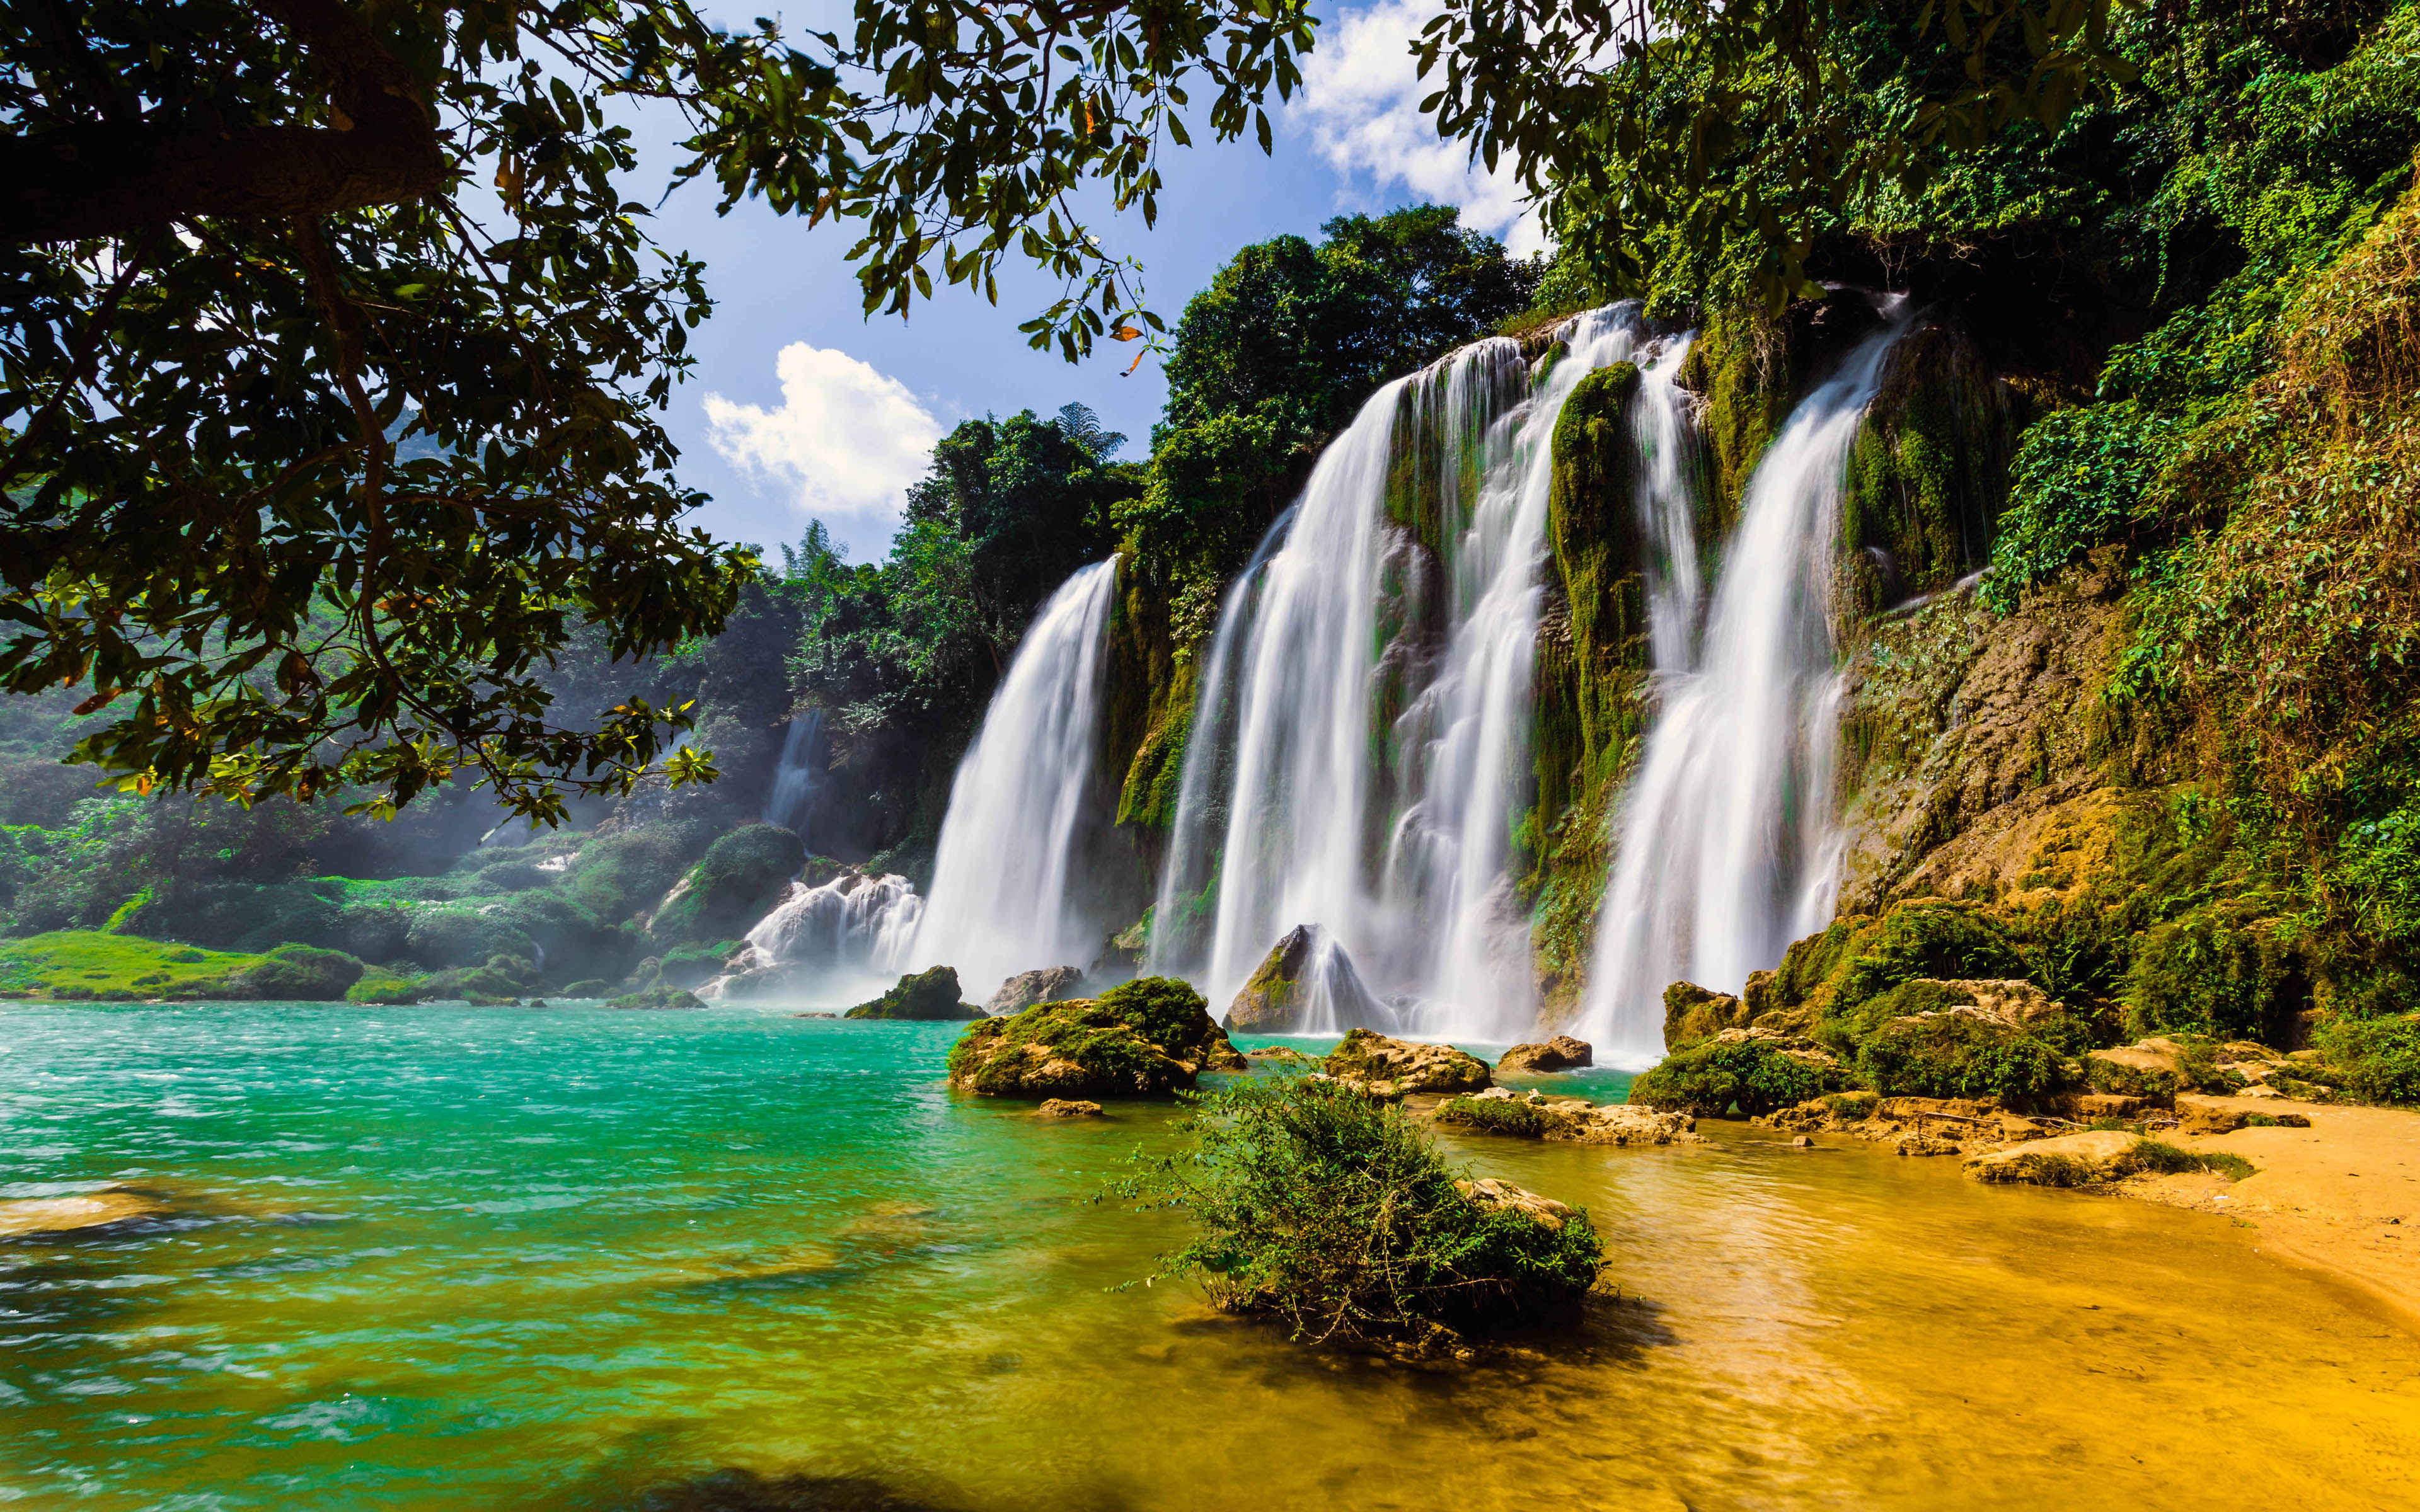 Ban Gioc Waterfall In China And Vietnam 4k Wallpapers Hd &amp; Images For Desktop And Mobile